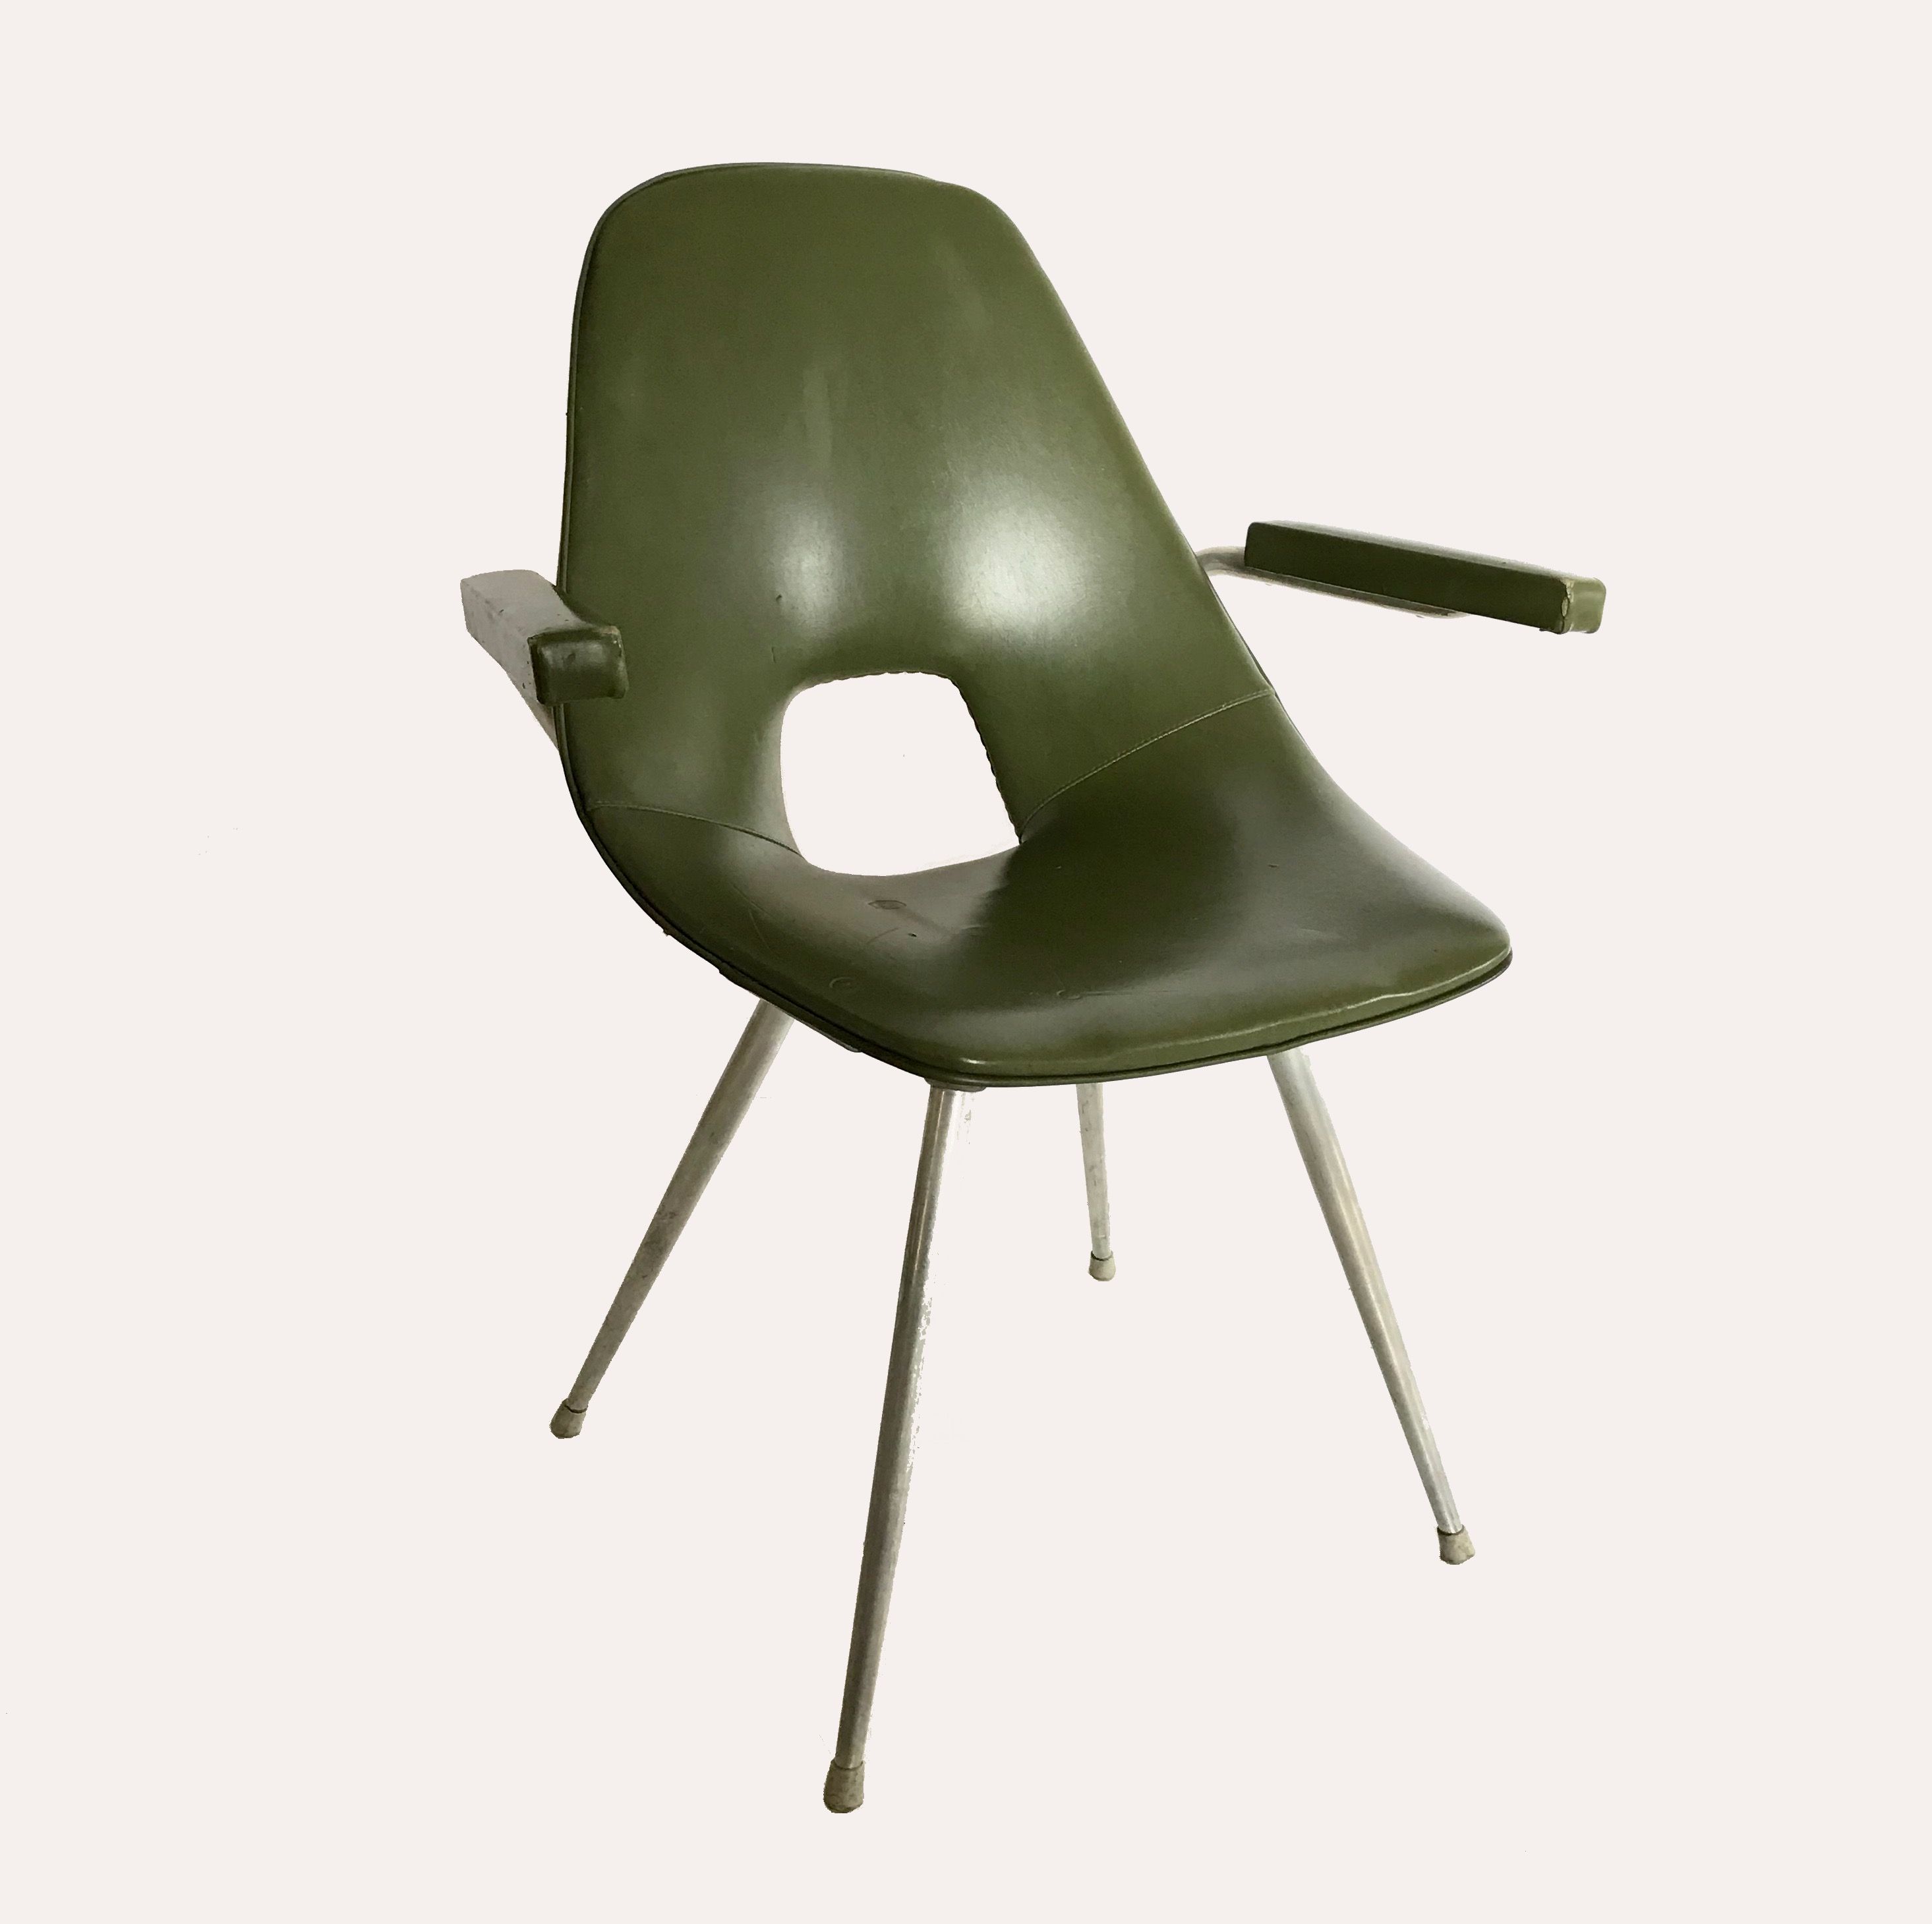 Vintage Office Chair By S I A Italy 1950 Design Market